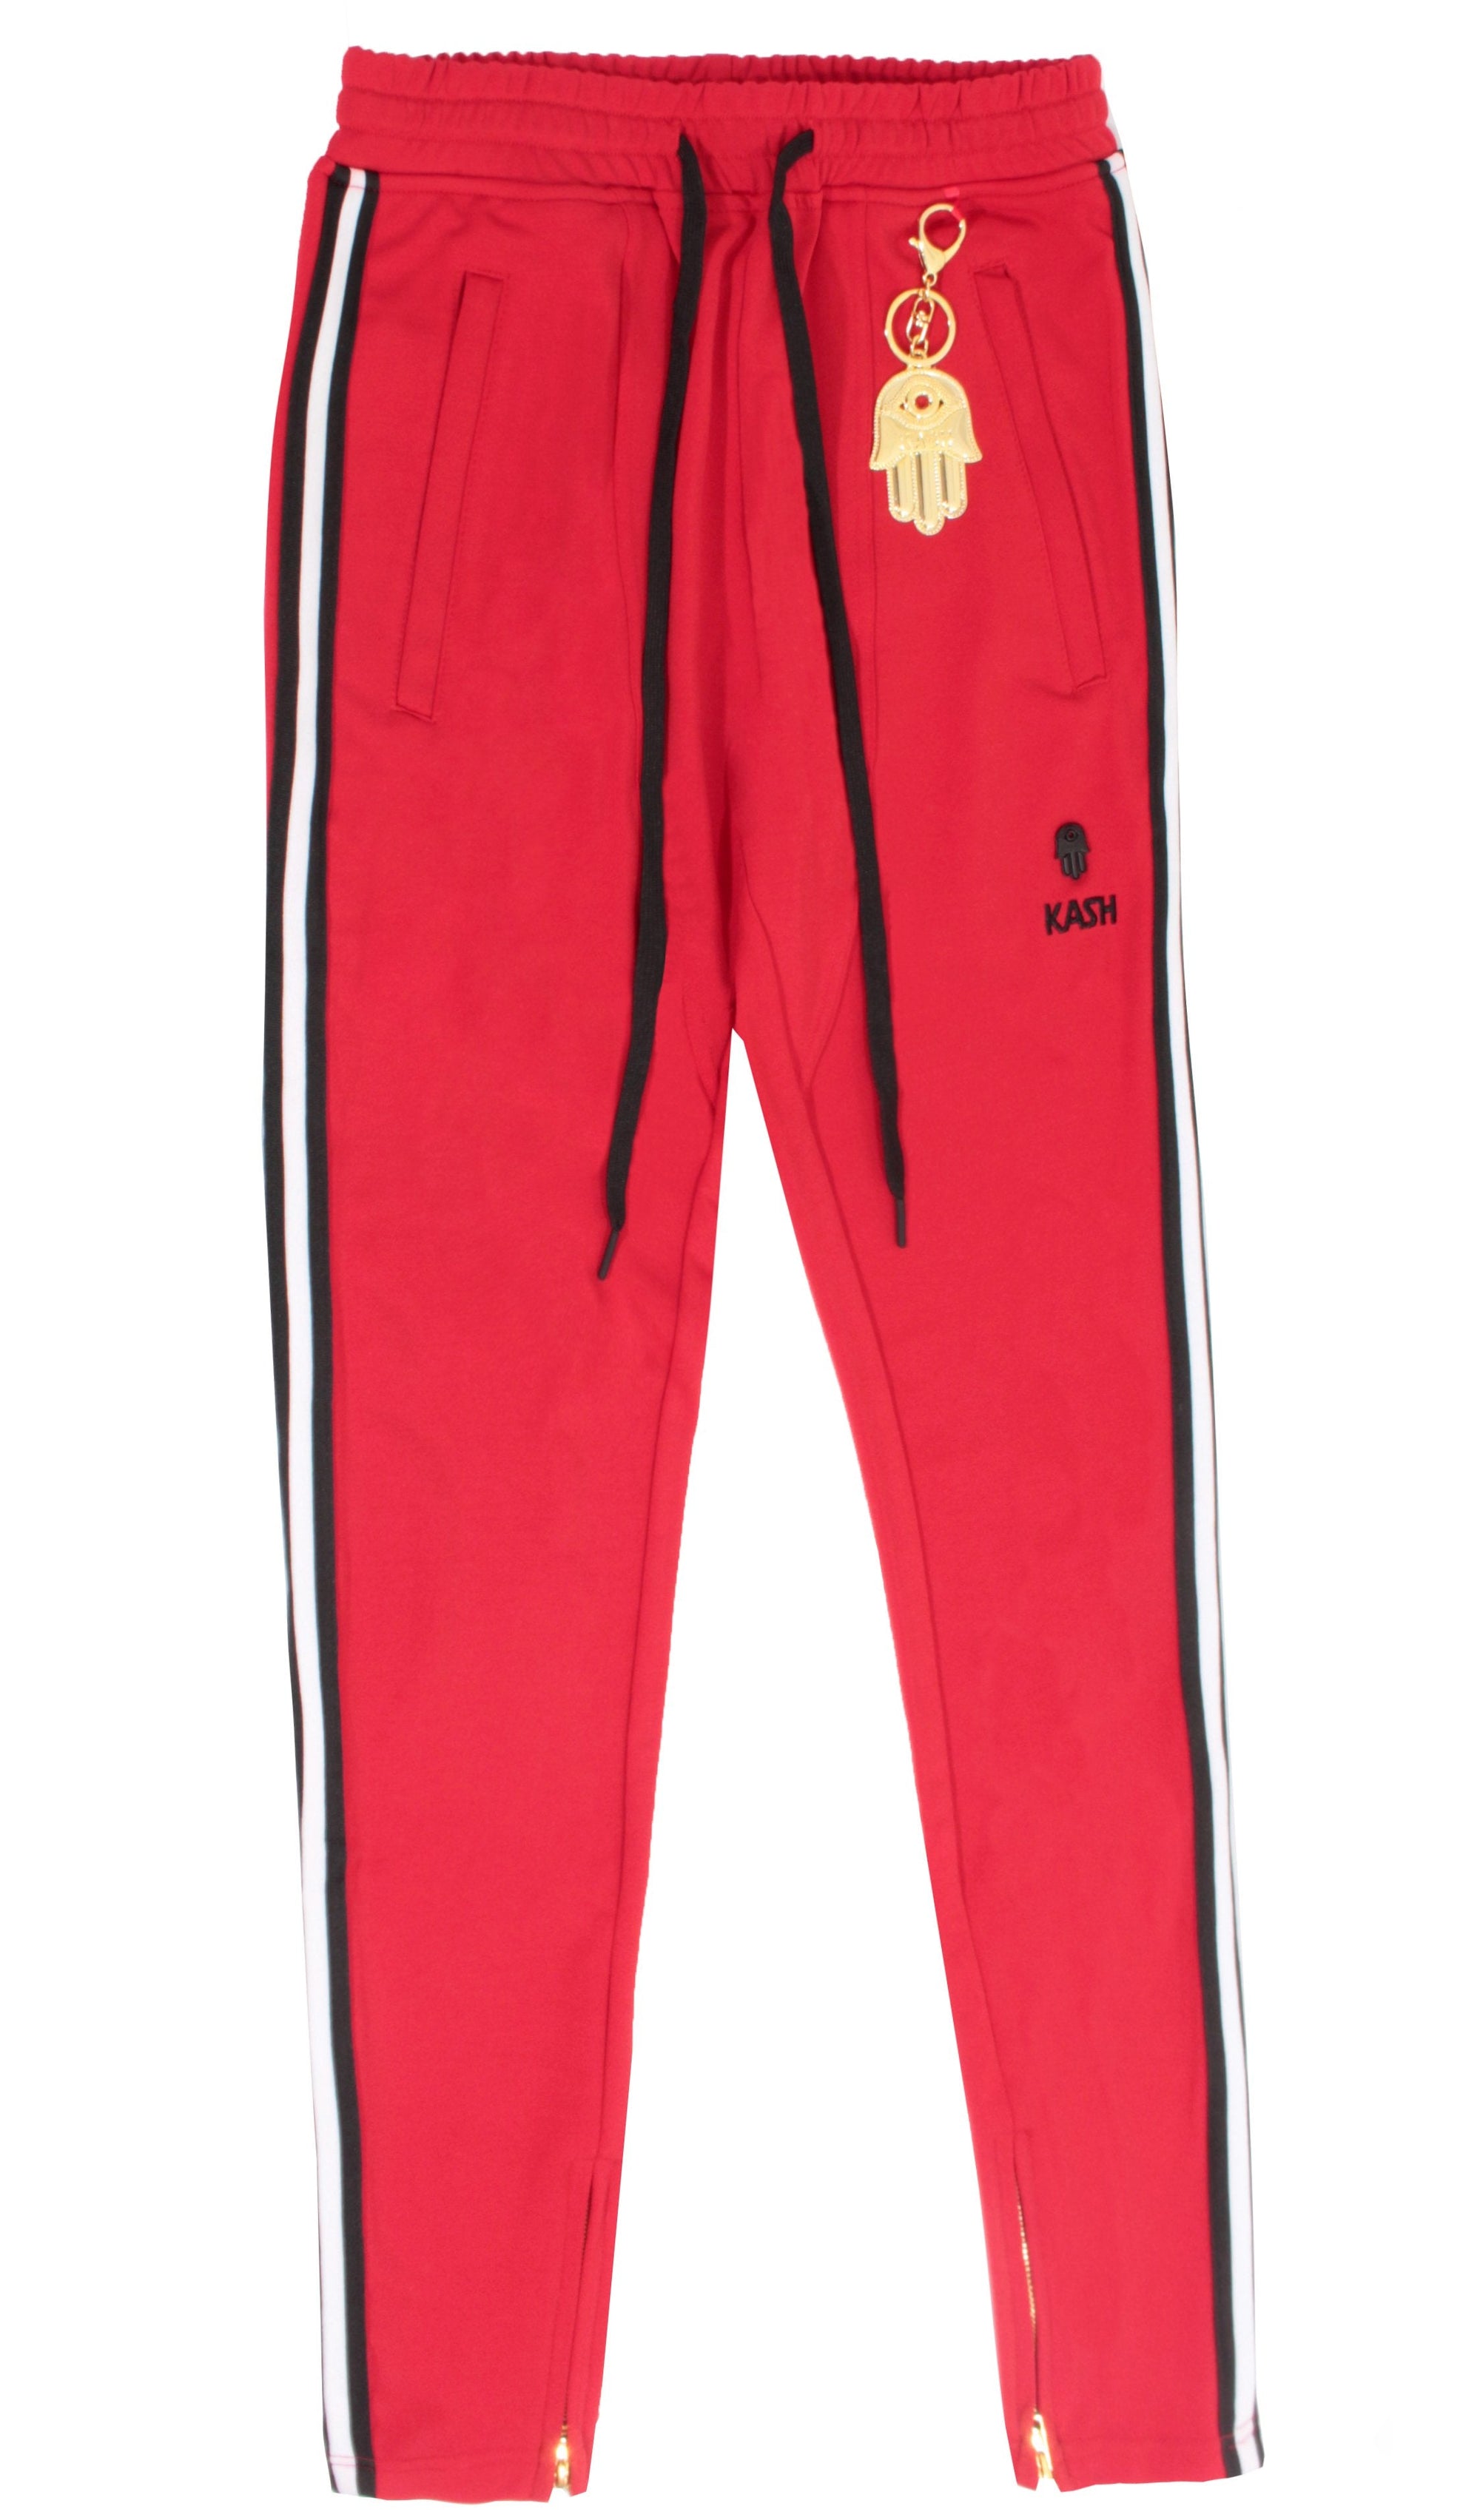 Kash Track Pant W/ Embroidery - Red